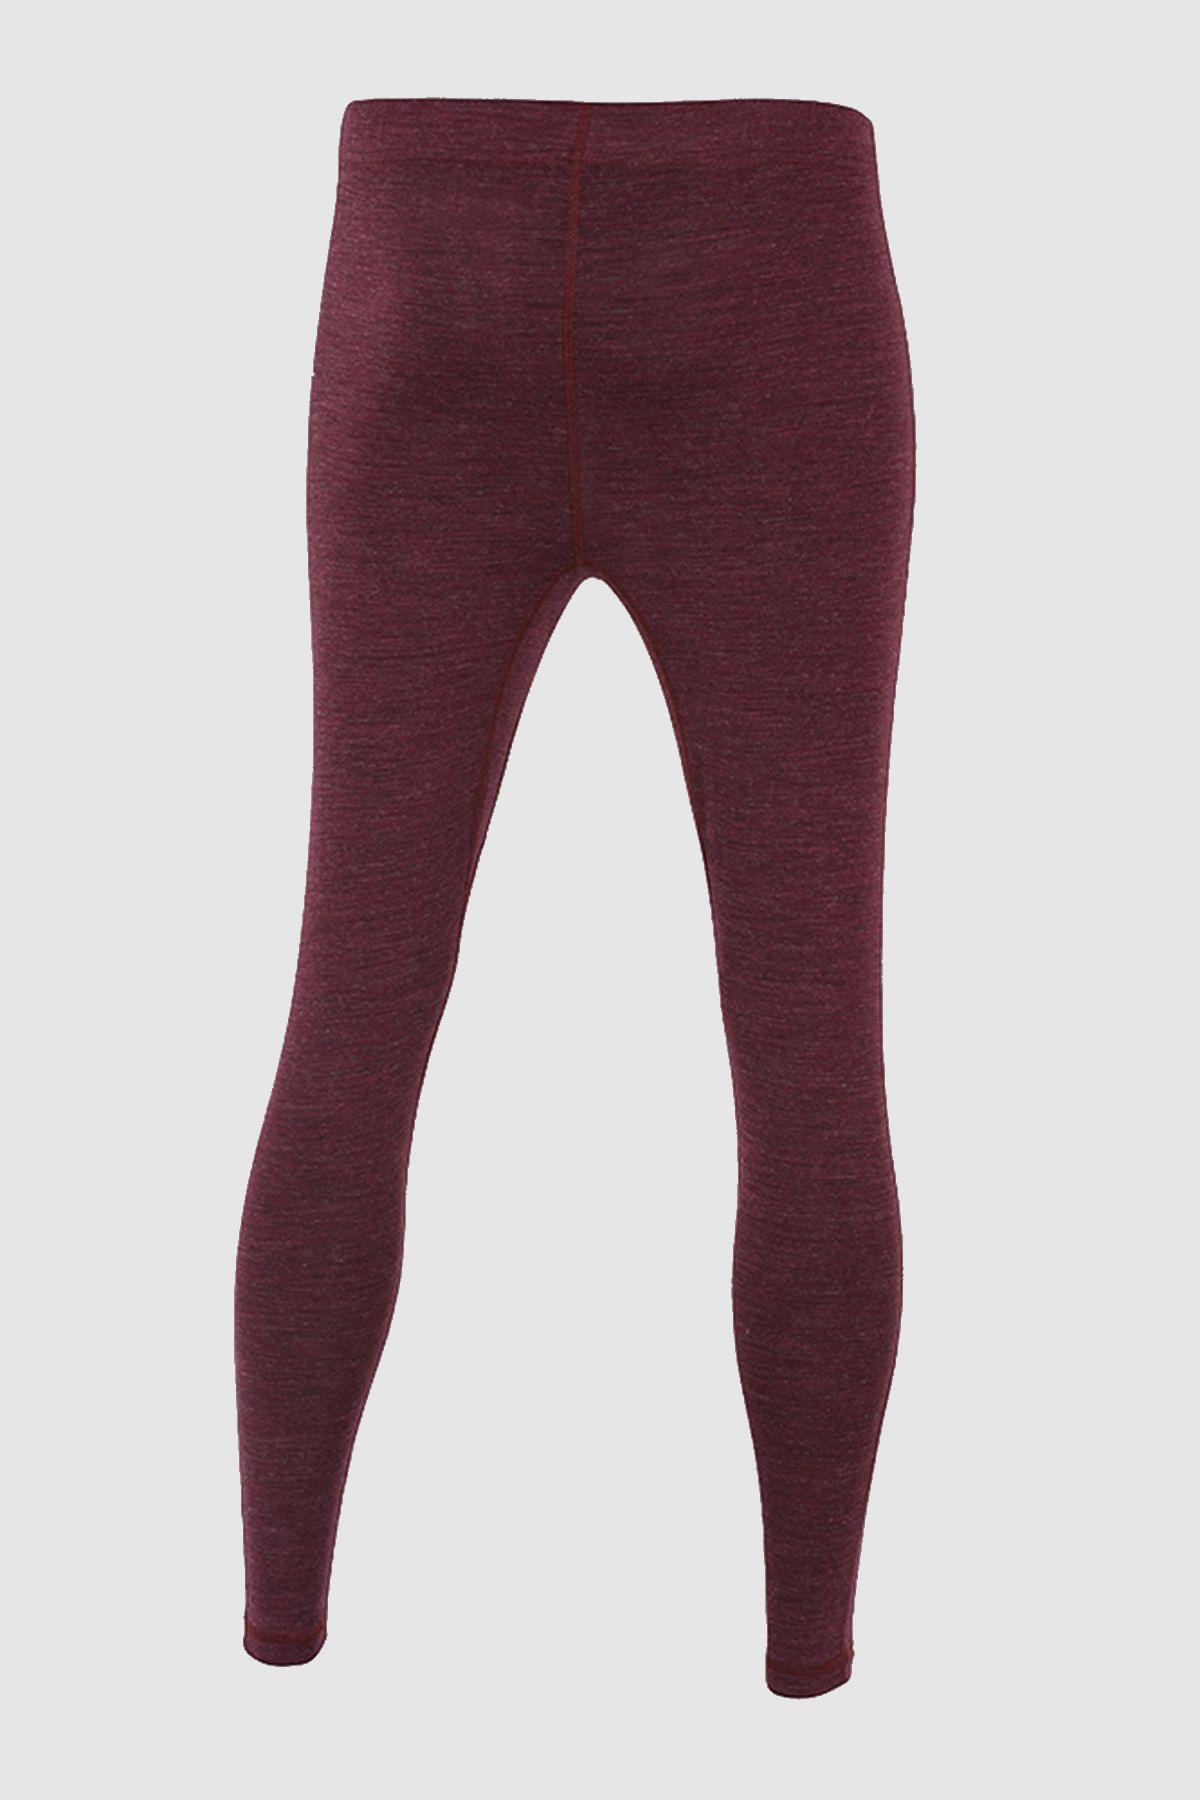 Jockey Women Thermal Leggings Lower – 2520 – Online Shopping site in India-cacanhphuclong.com.vn